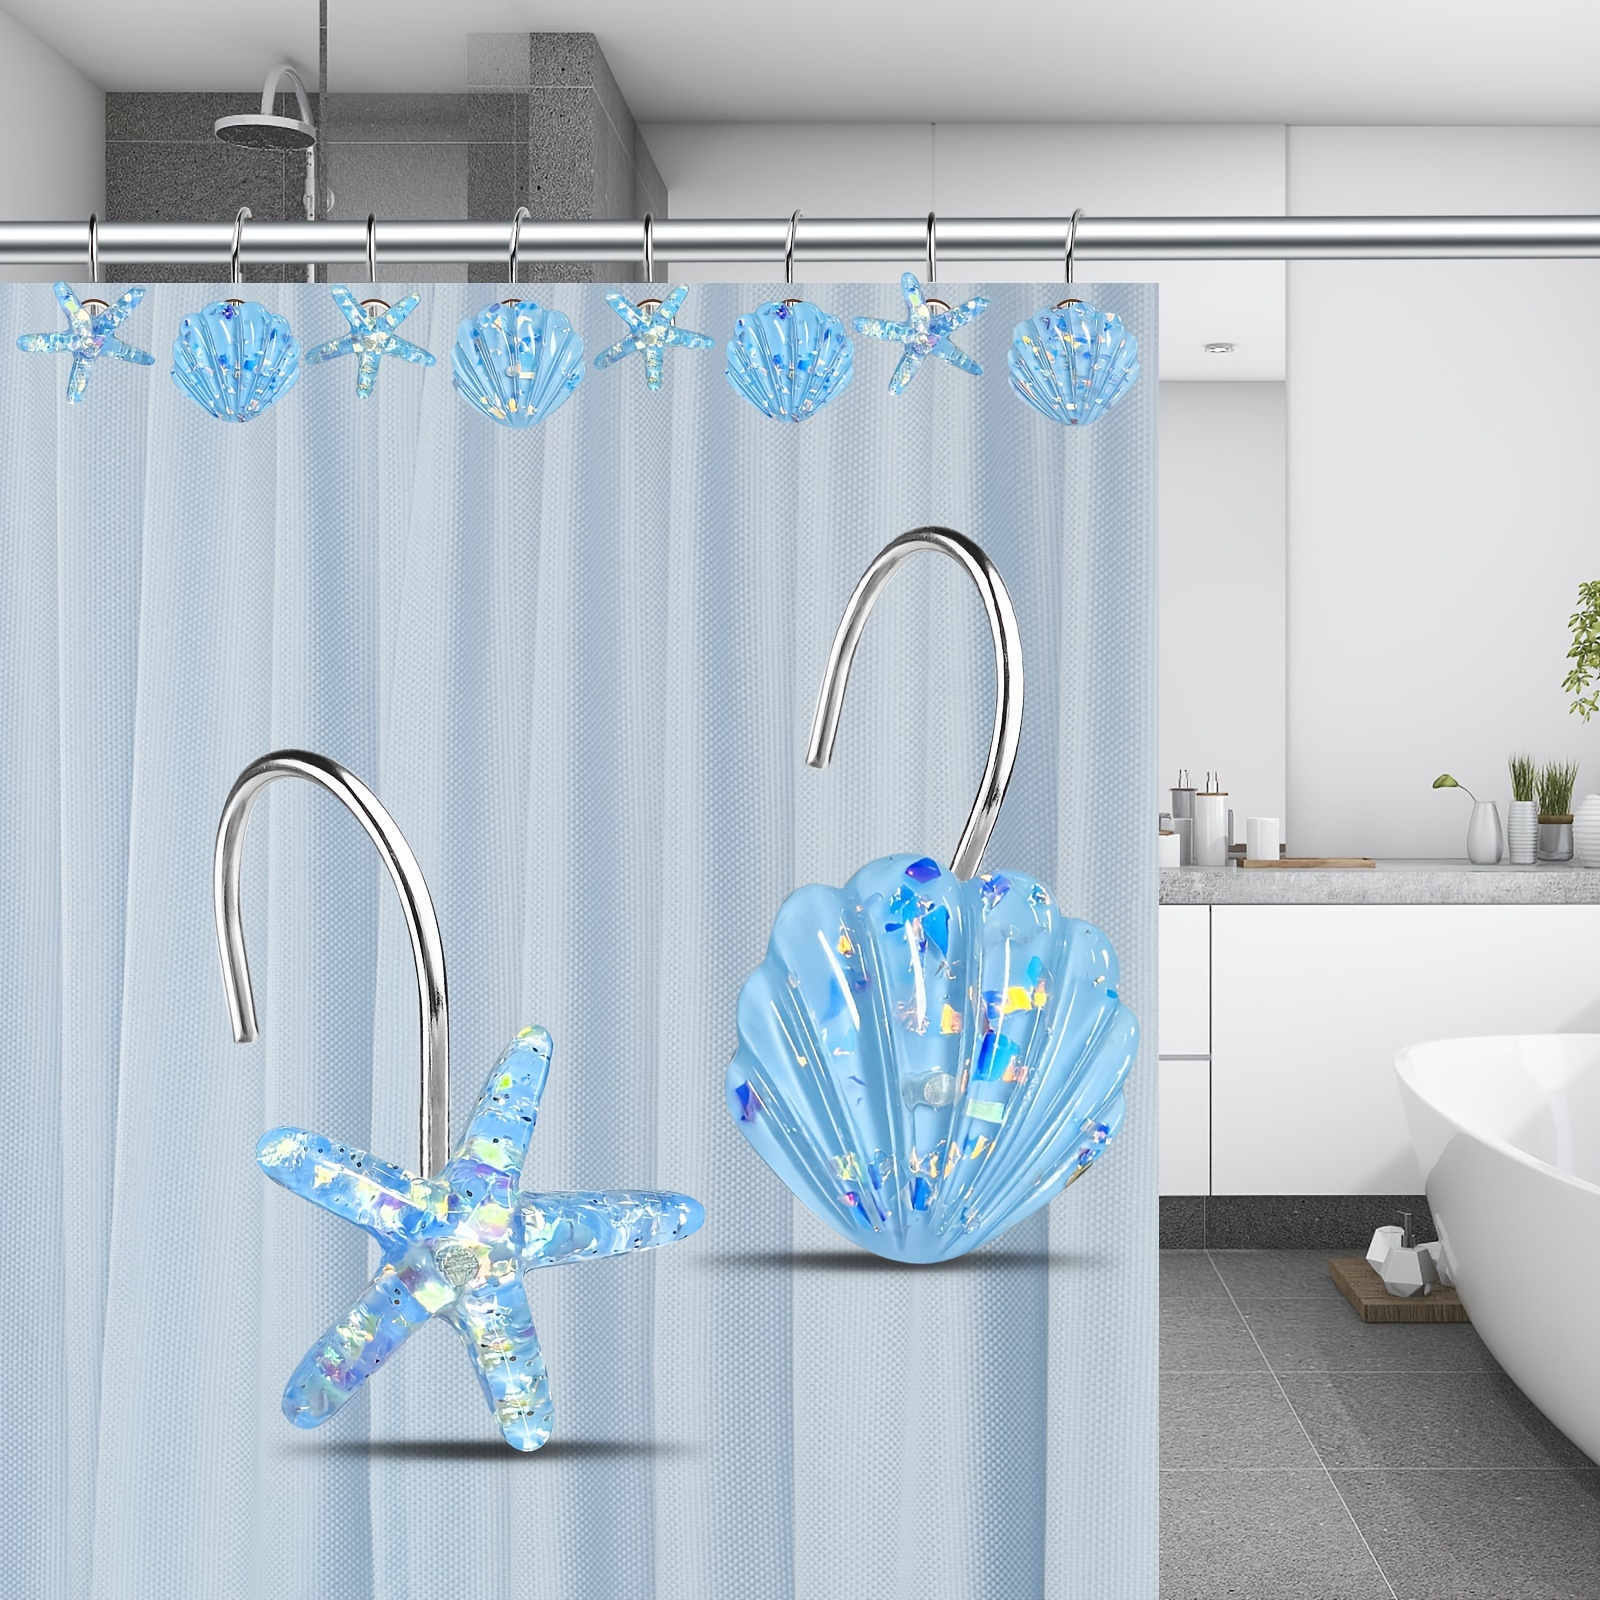 12 pcs Sparkling Starfish and Seashell Shower Curtain Hooks - Resistant to  Corrosion and Stains, Perfect for Ocean Themed Bathroom Decor, Blue and Whi